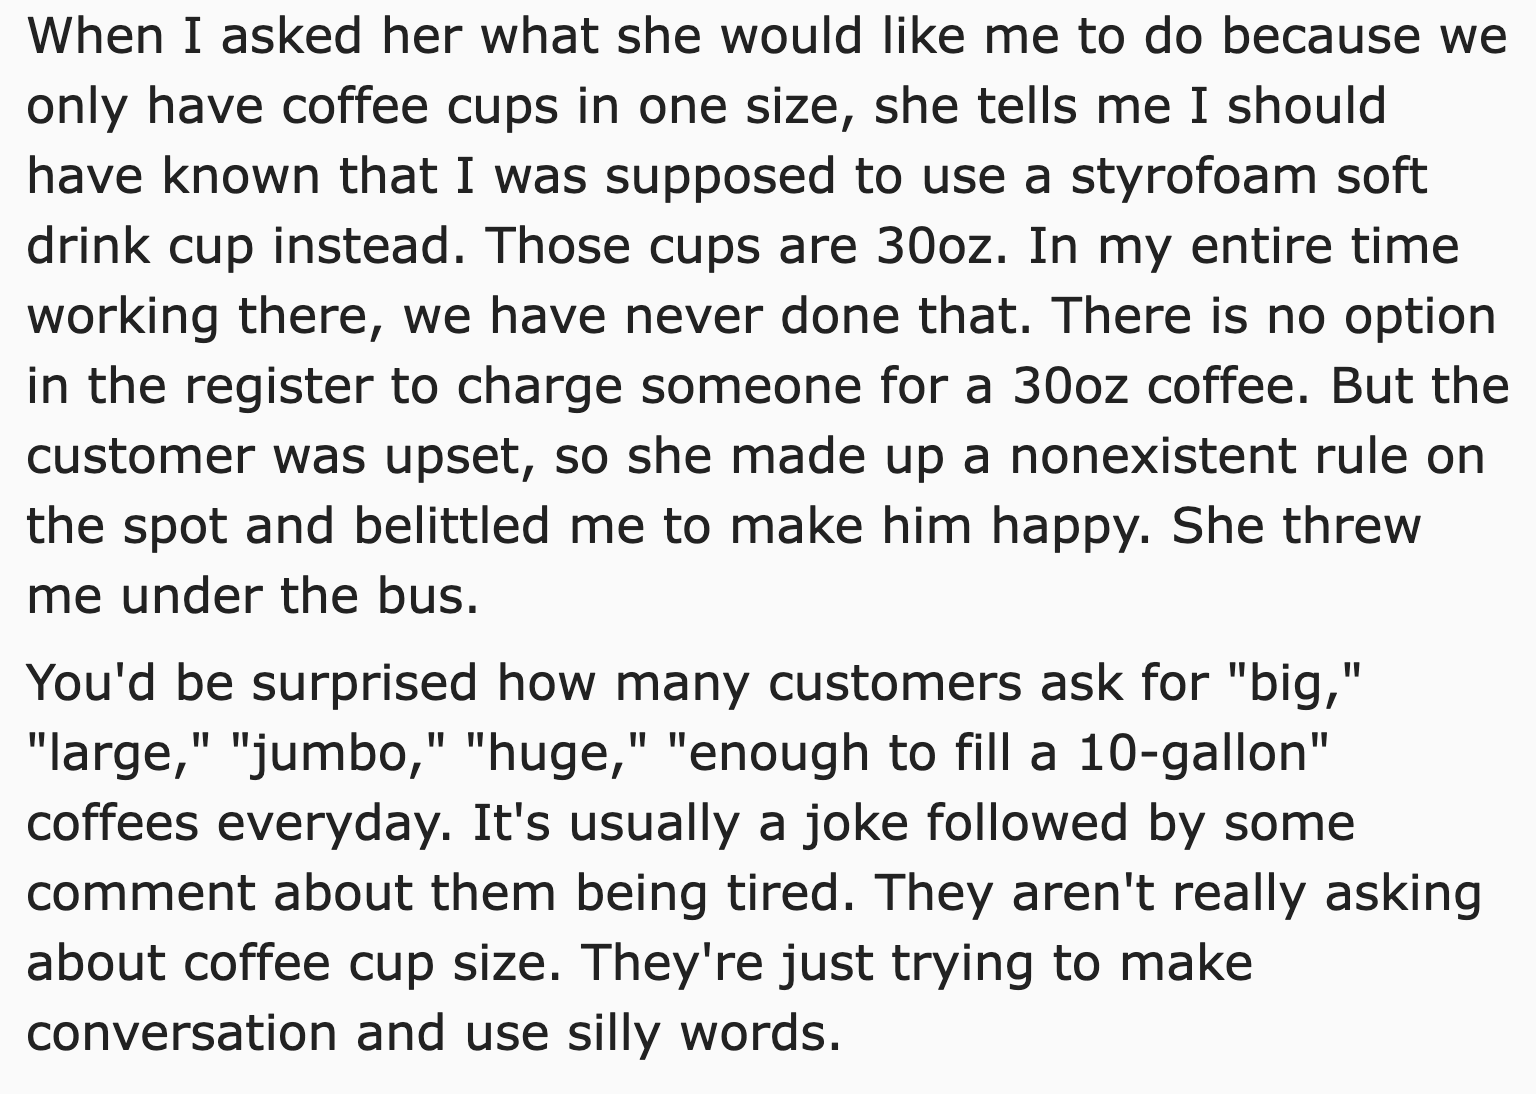 malicious compliance free coffee - angle - When I asked her what she would me to do because we only have coffee cups in one size, she tells me I should have known that I was supposed to use a styrofoam soft drink cup instead. Those cups are 30oz. In my en